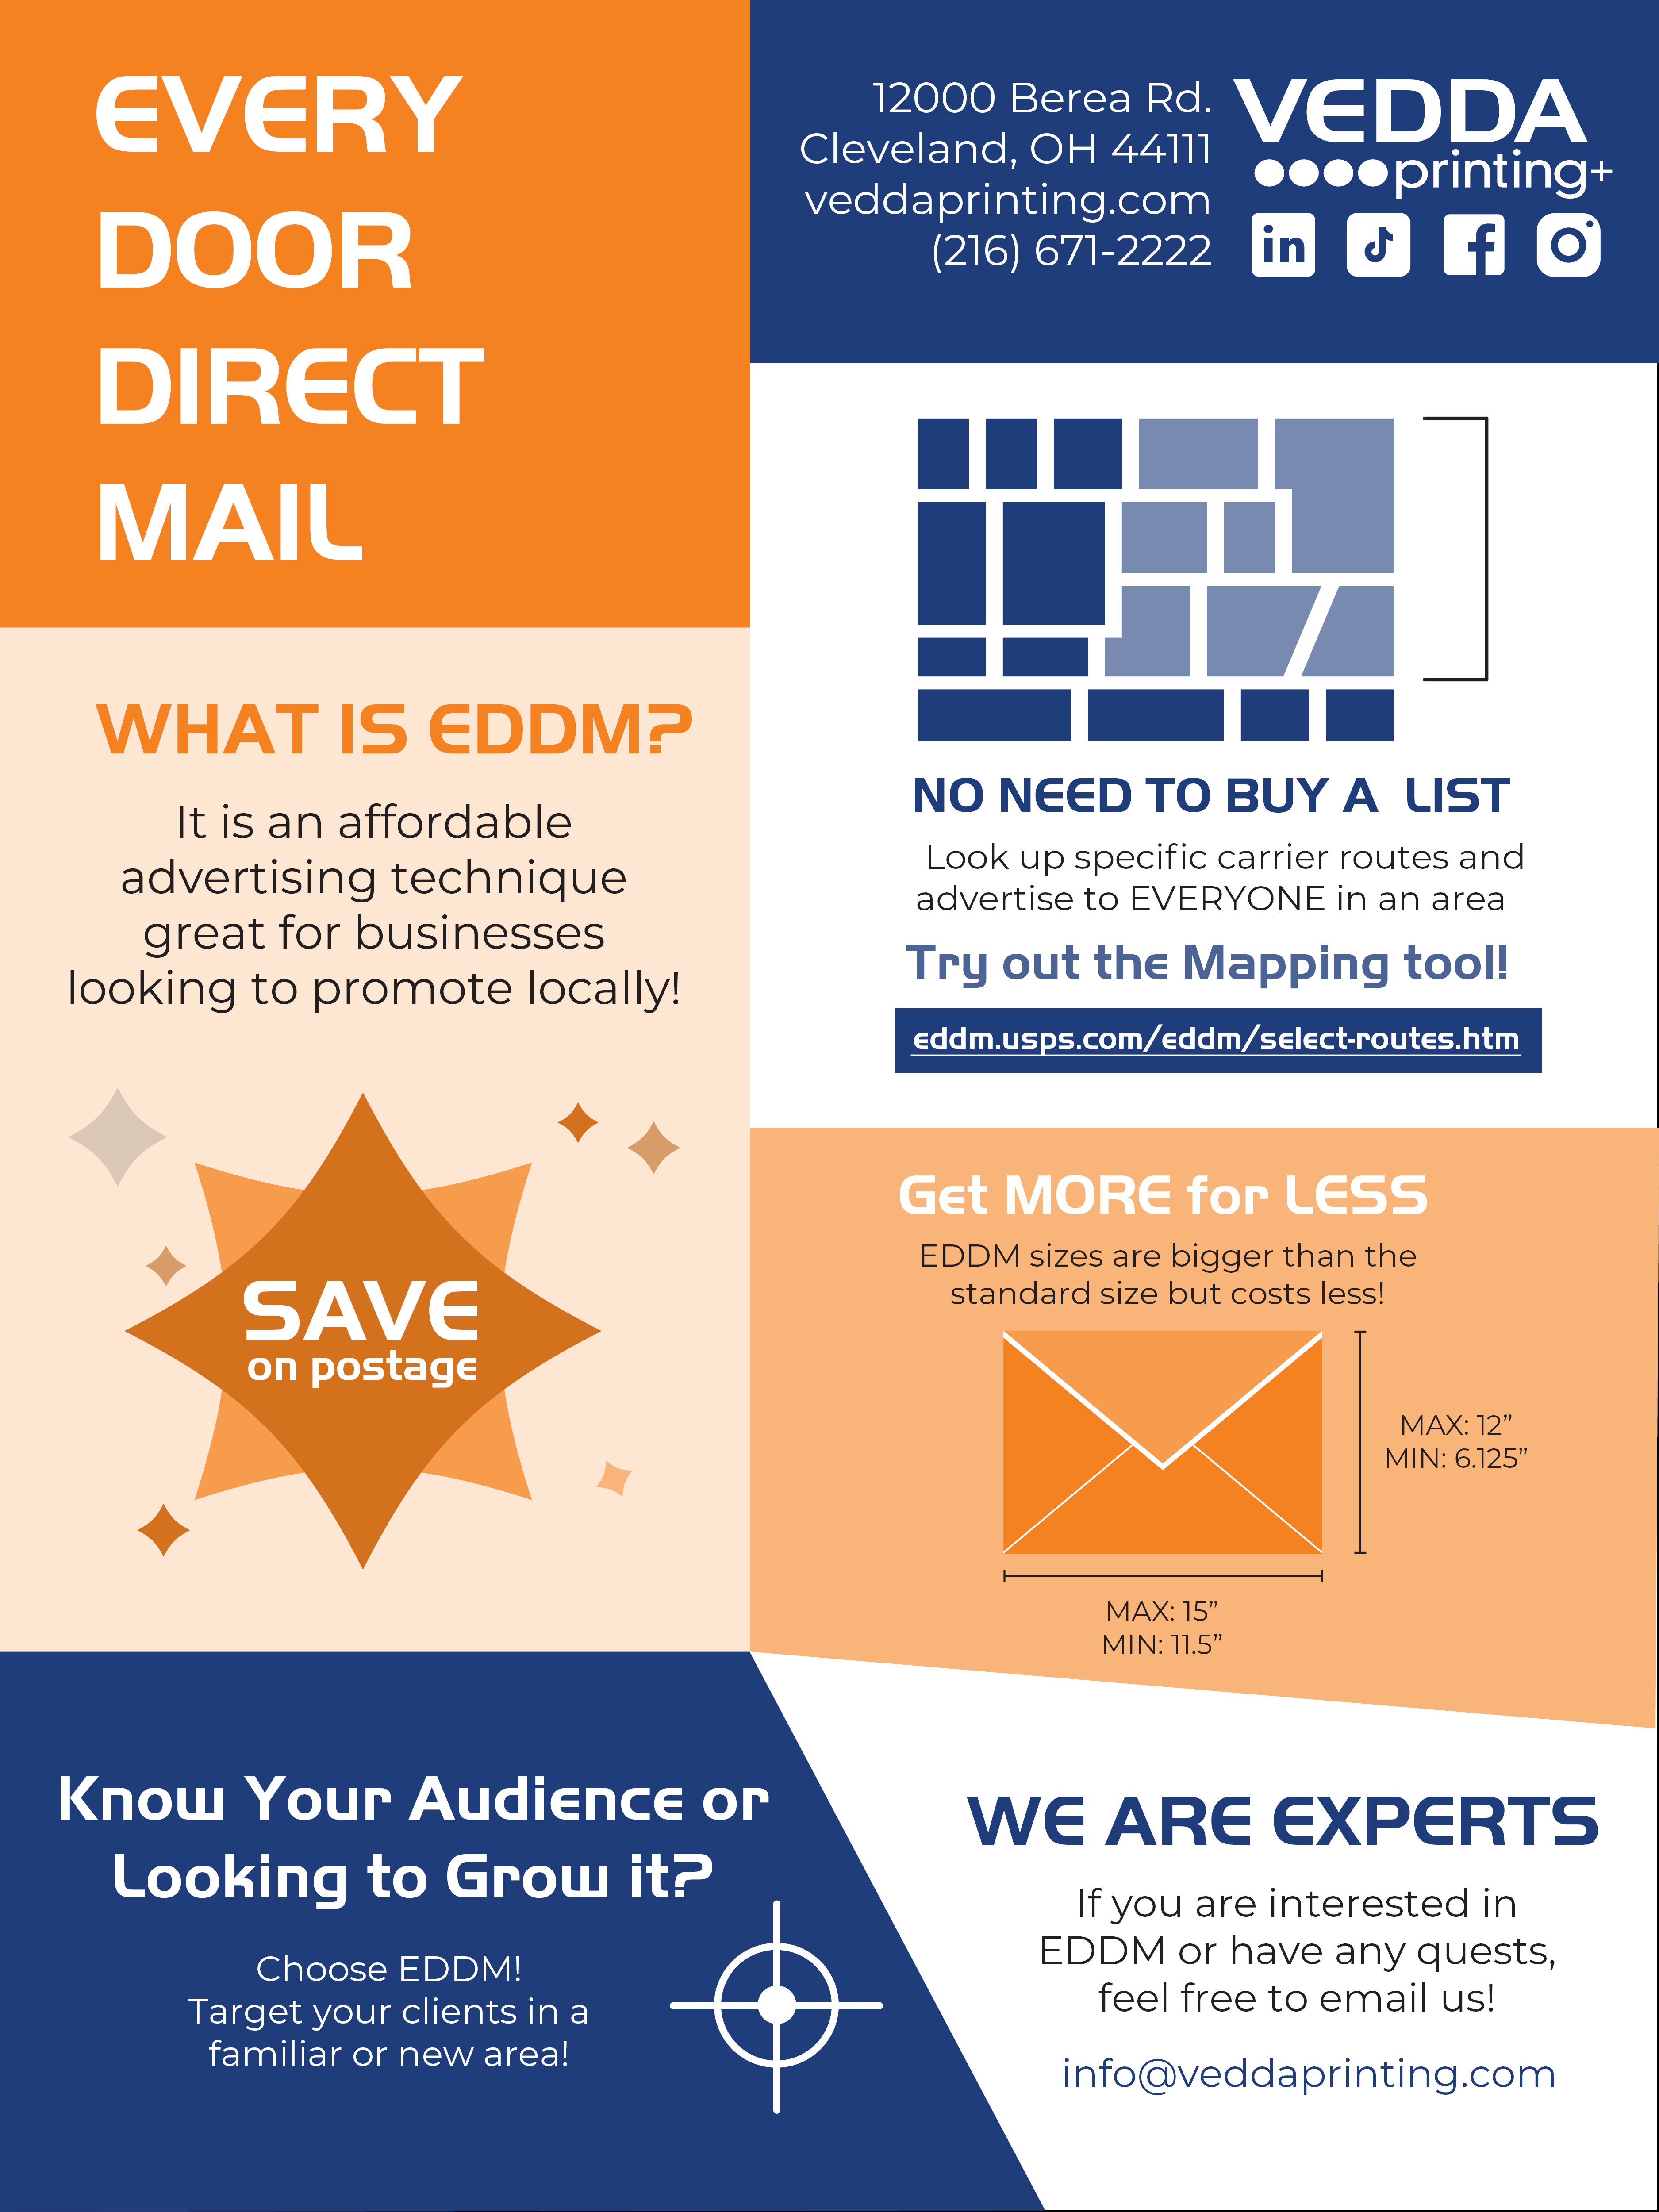 Every Door Direct Mail infographic that explains what EDDM is and why businesses should consider it